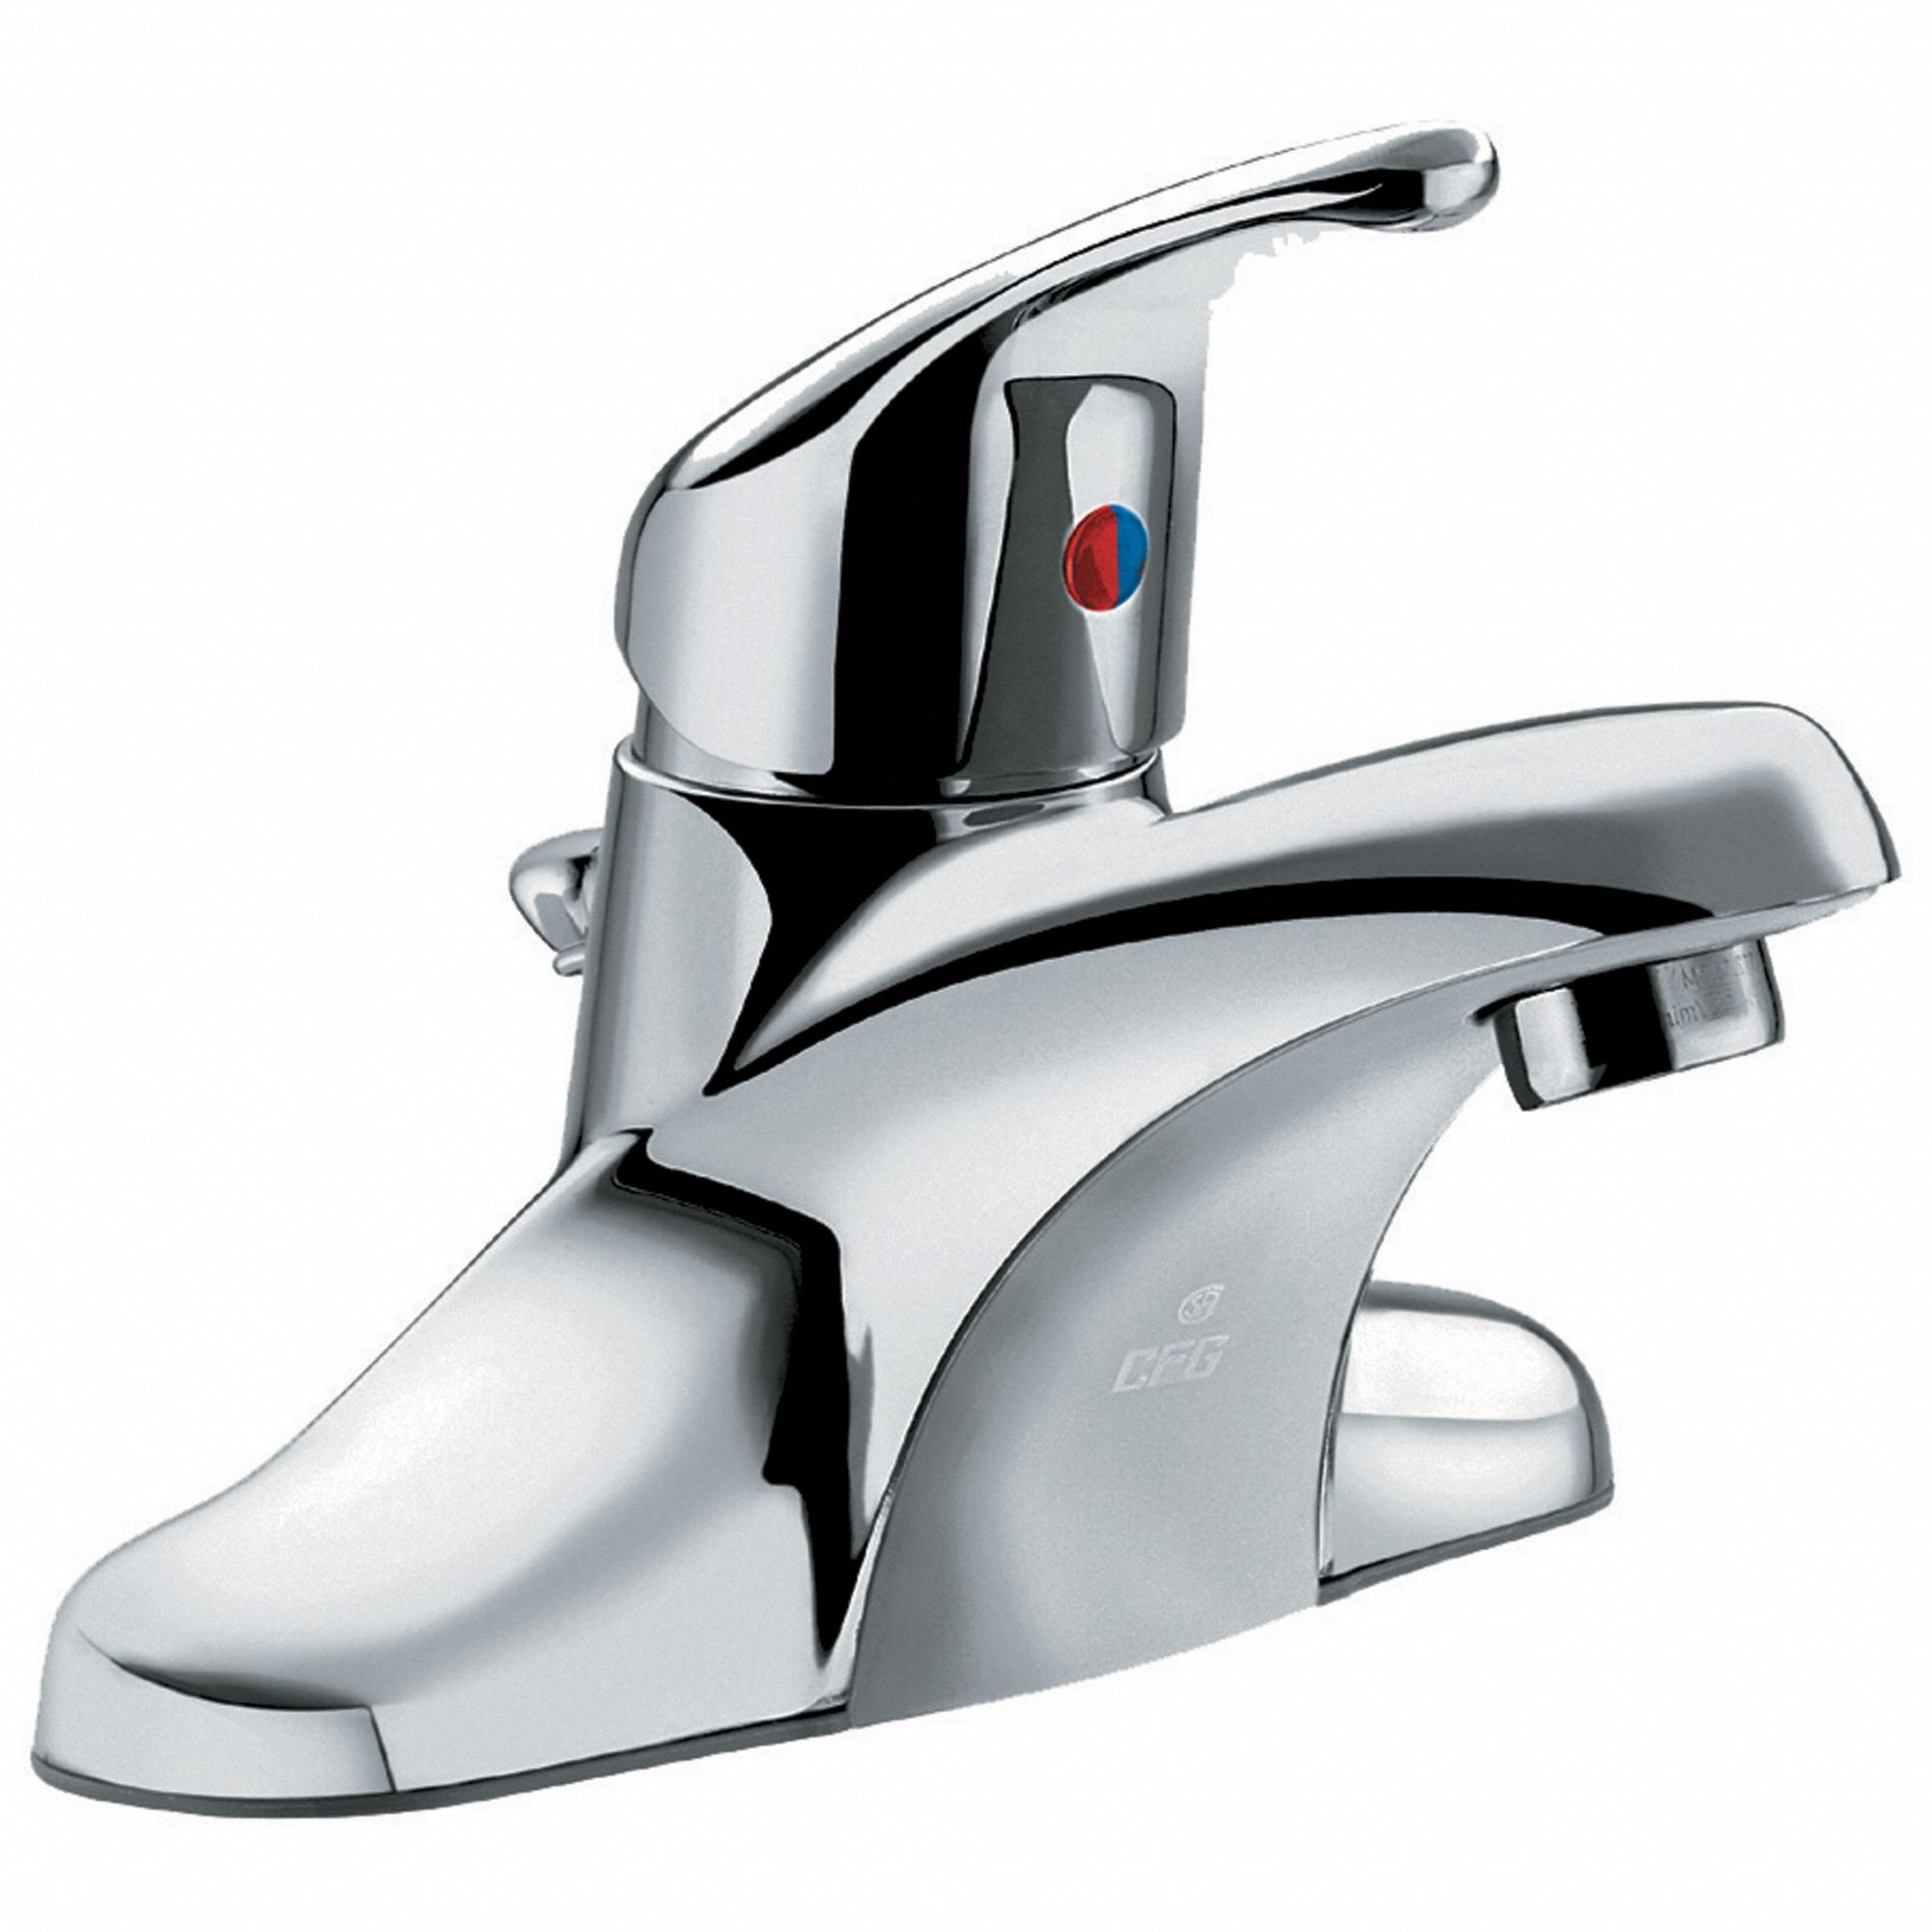 Bathroom Faucet: Cornerstone®, Chrome Finish, 1.5 gpm Flow Rate, Drain with Pop-Up Rod Drain